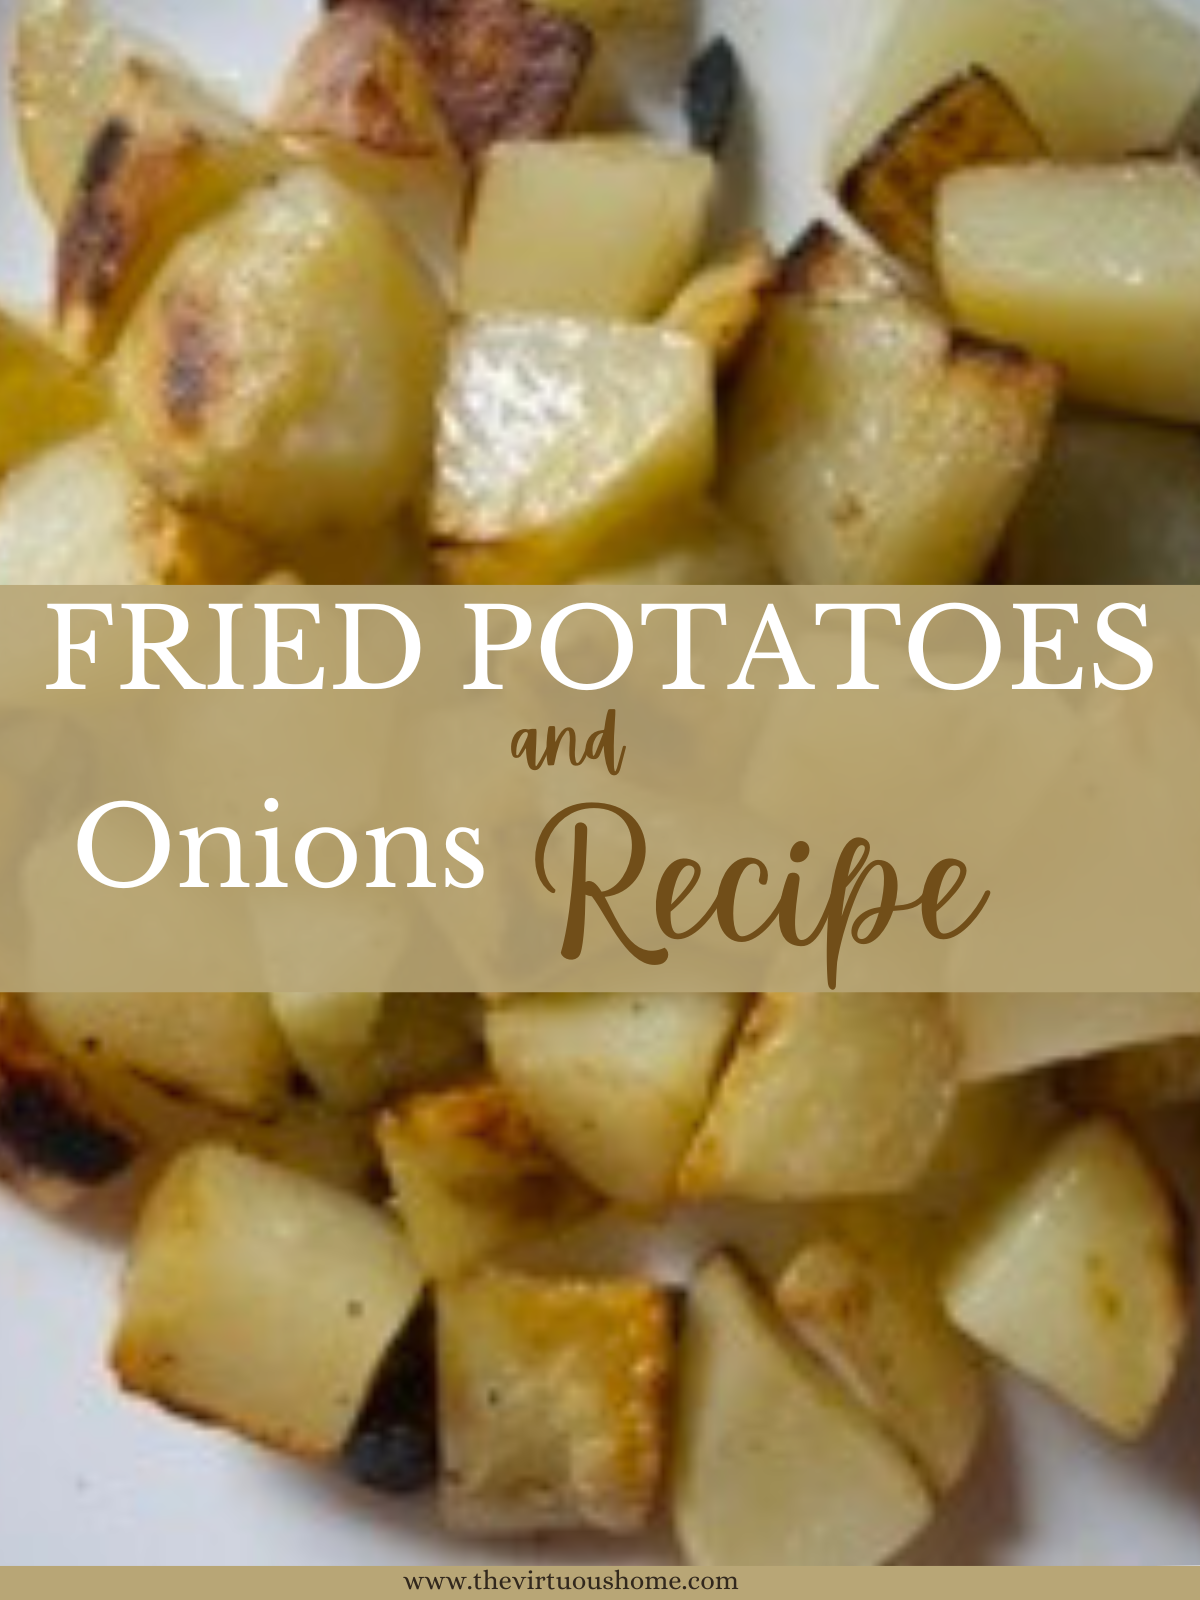 Fried potatoes and onions